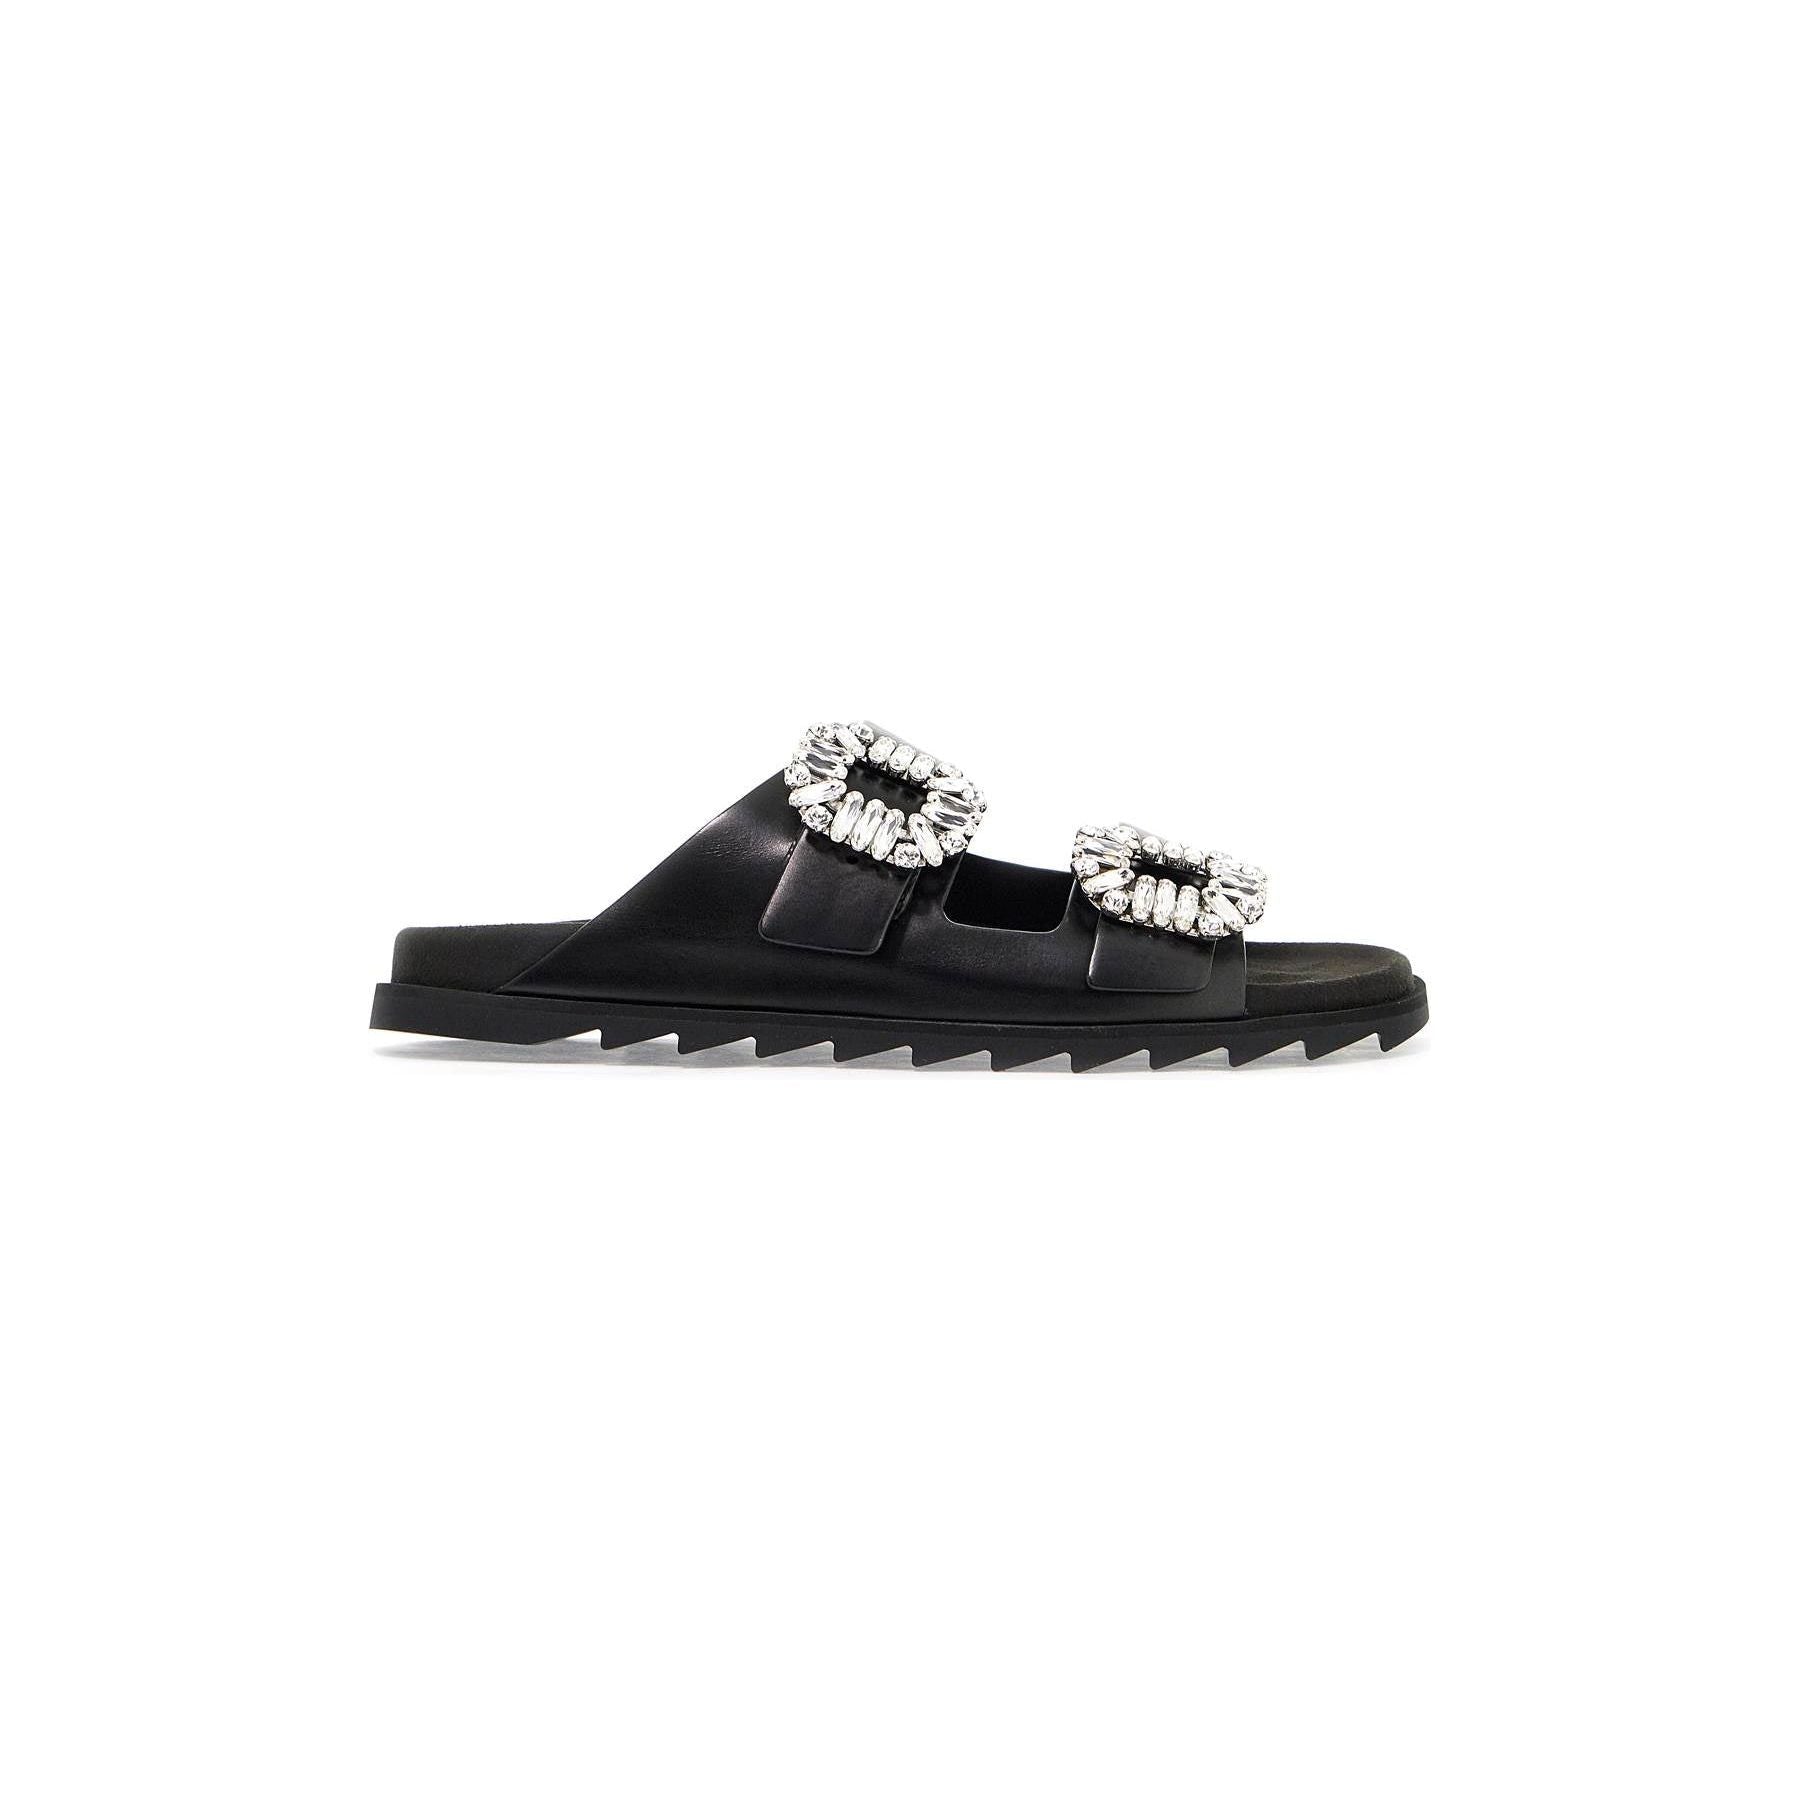 Slidy Viv' Strass Buckle Leather Mules